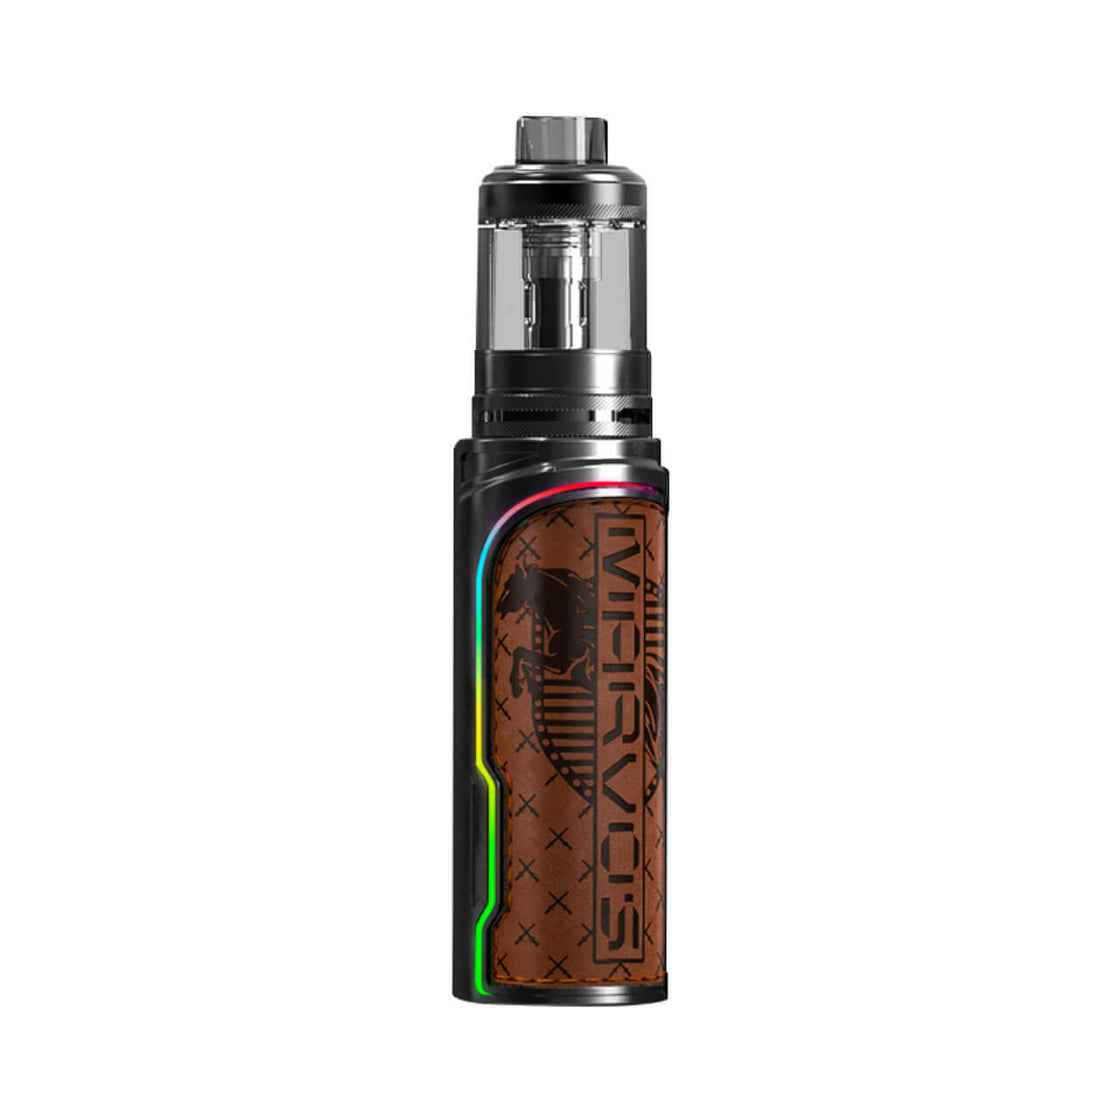 Marvos X 100W 18650 Pod System Starter Kit With Refillable 5ML CRC Pod By Freemax